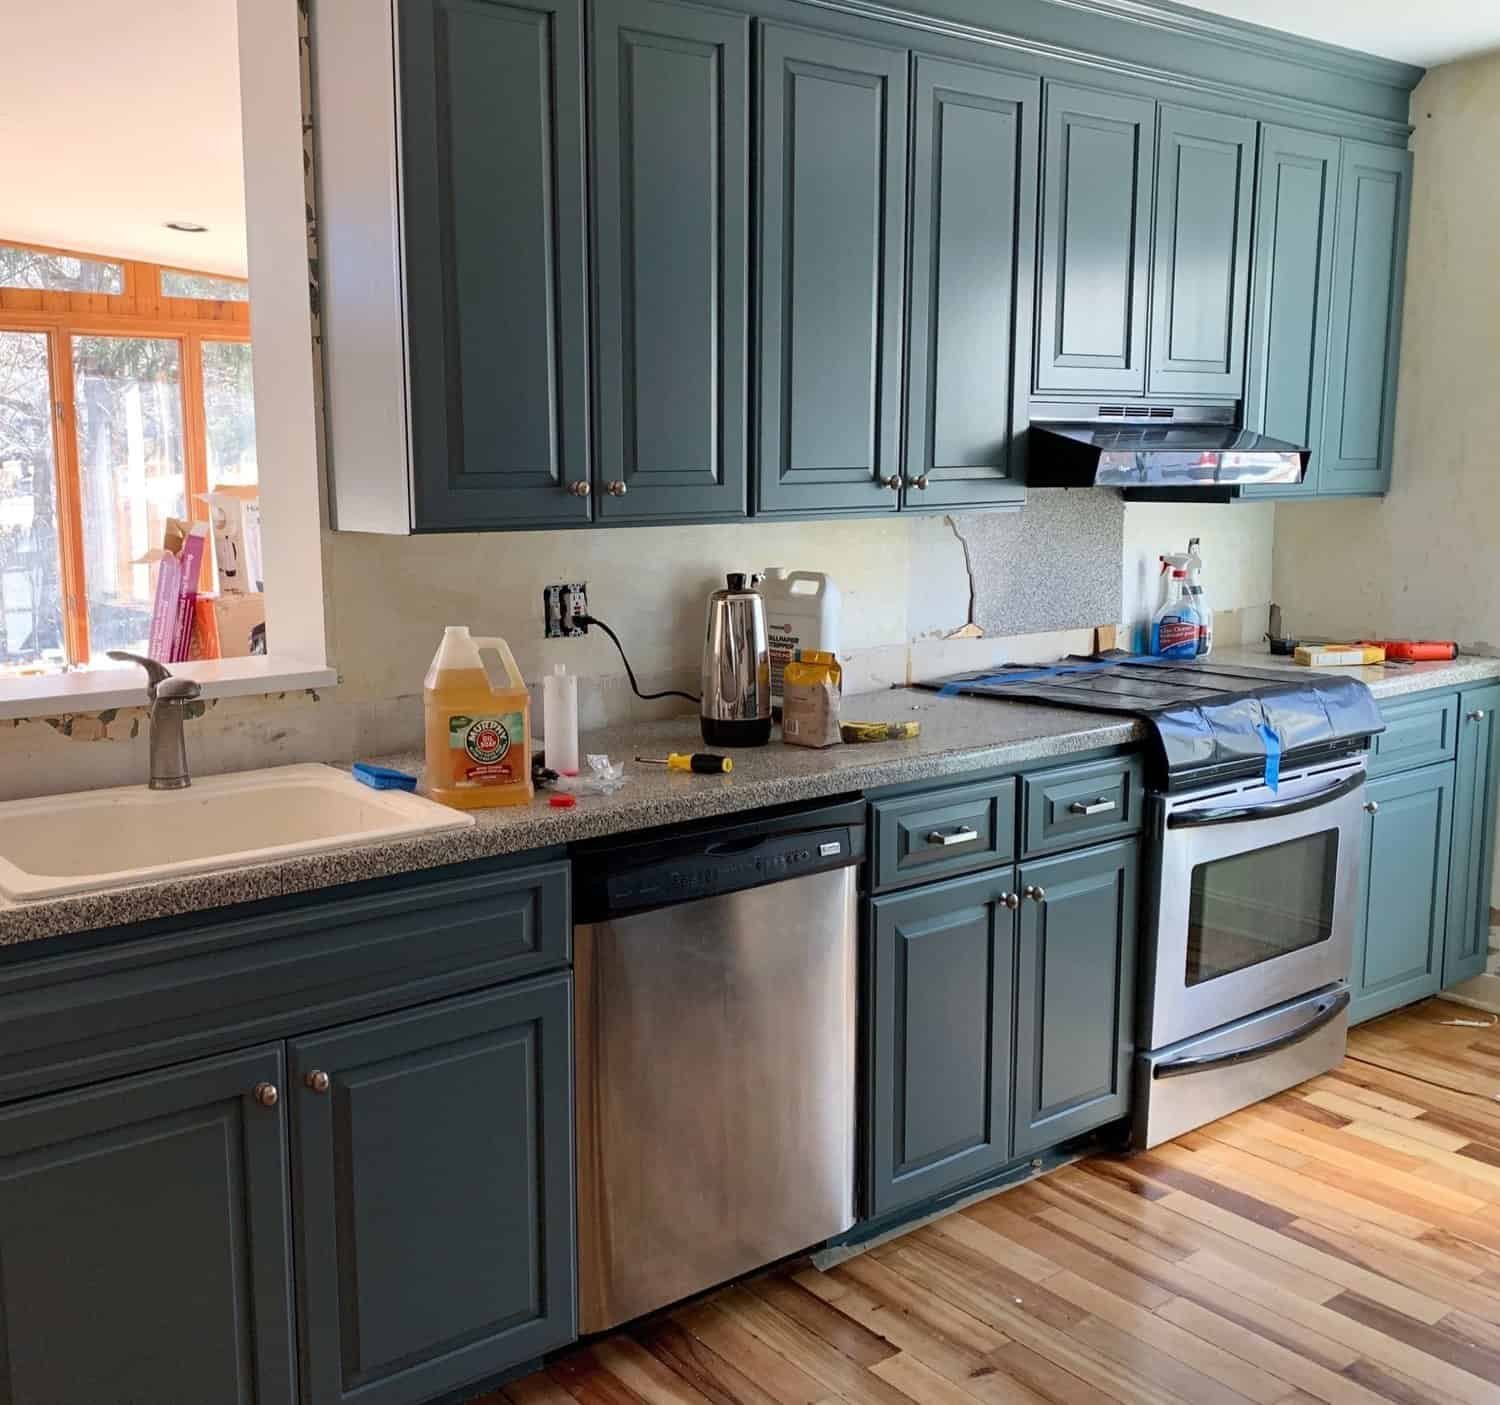 Kitchen with teal cabinets and stainless steel appliances, featuring a sink and tools on the countertop.